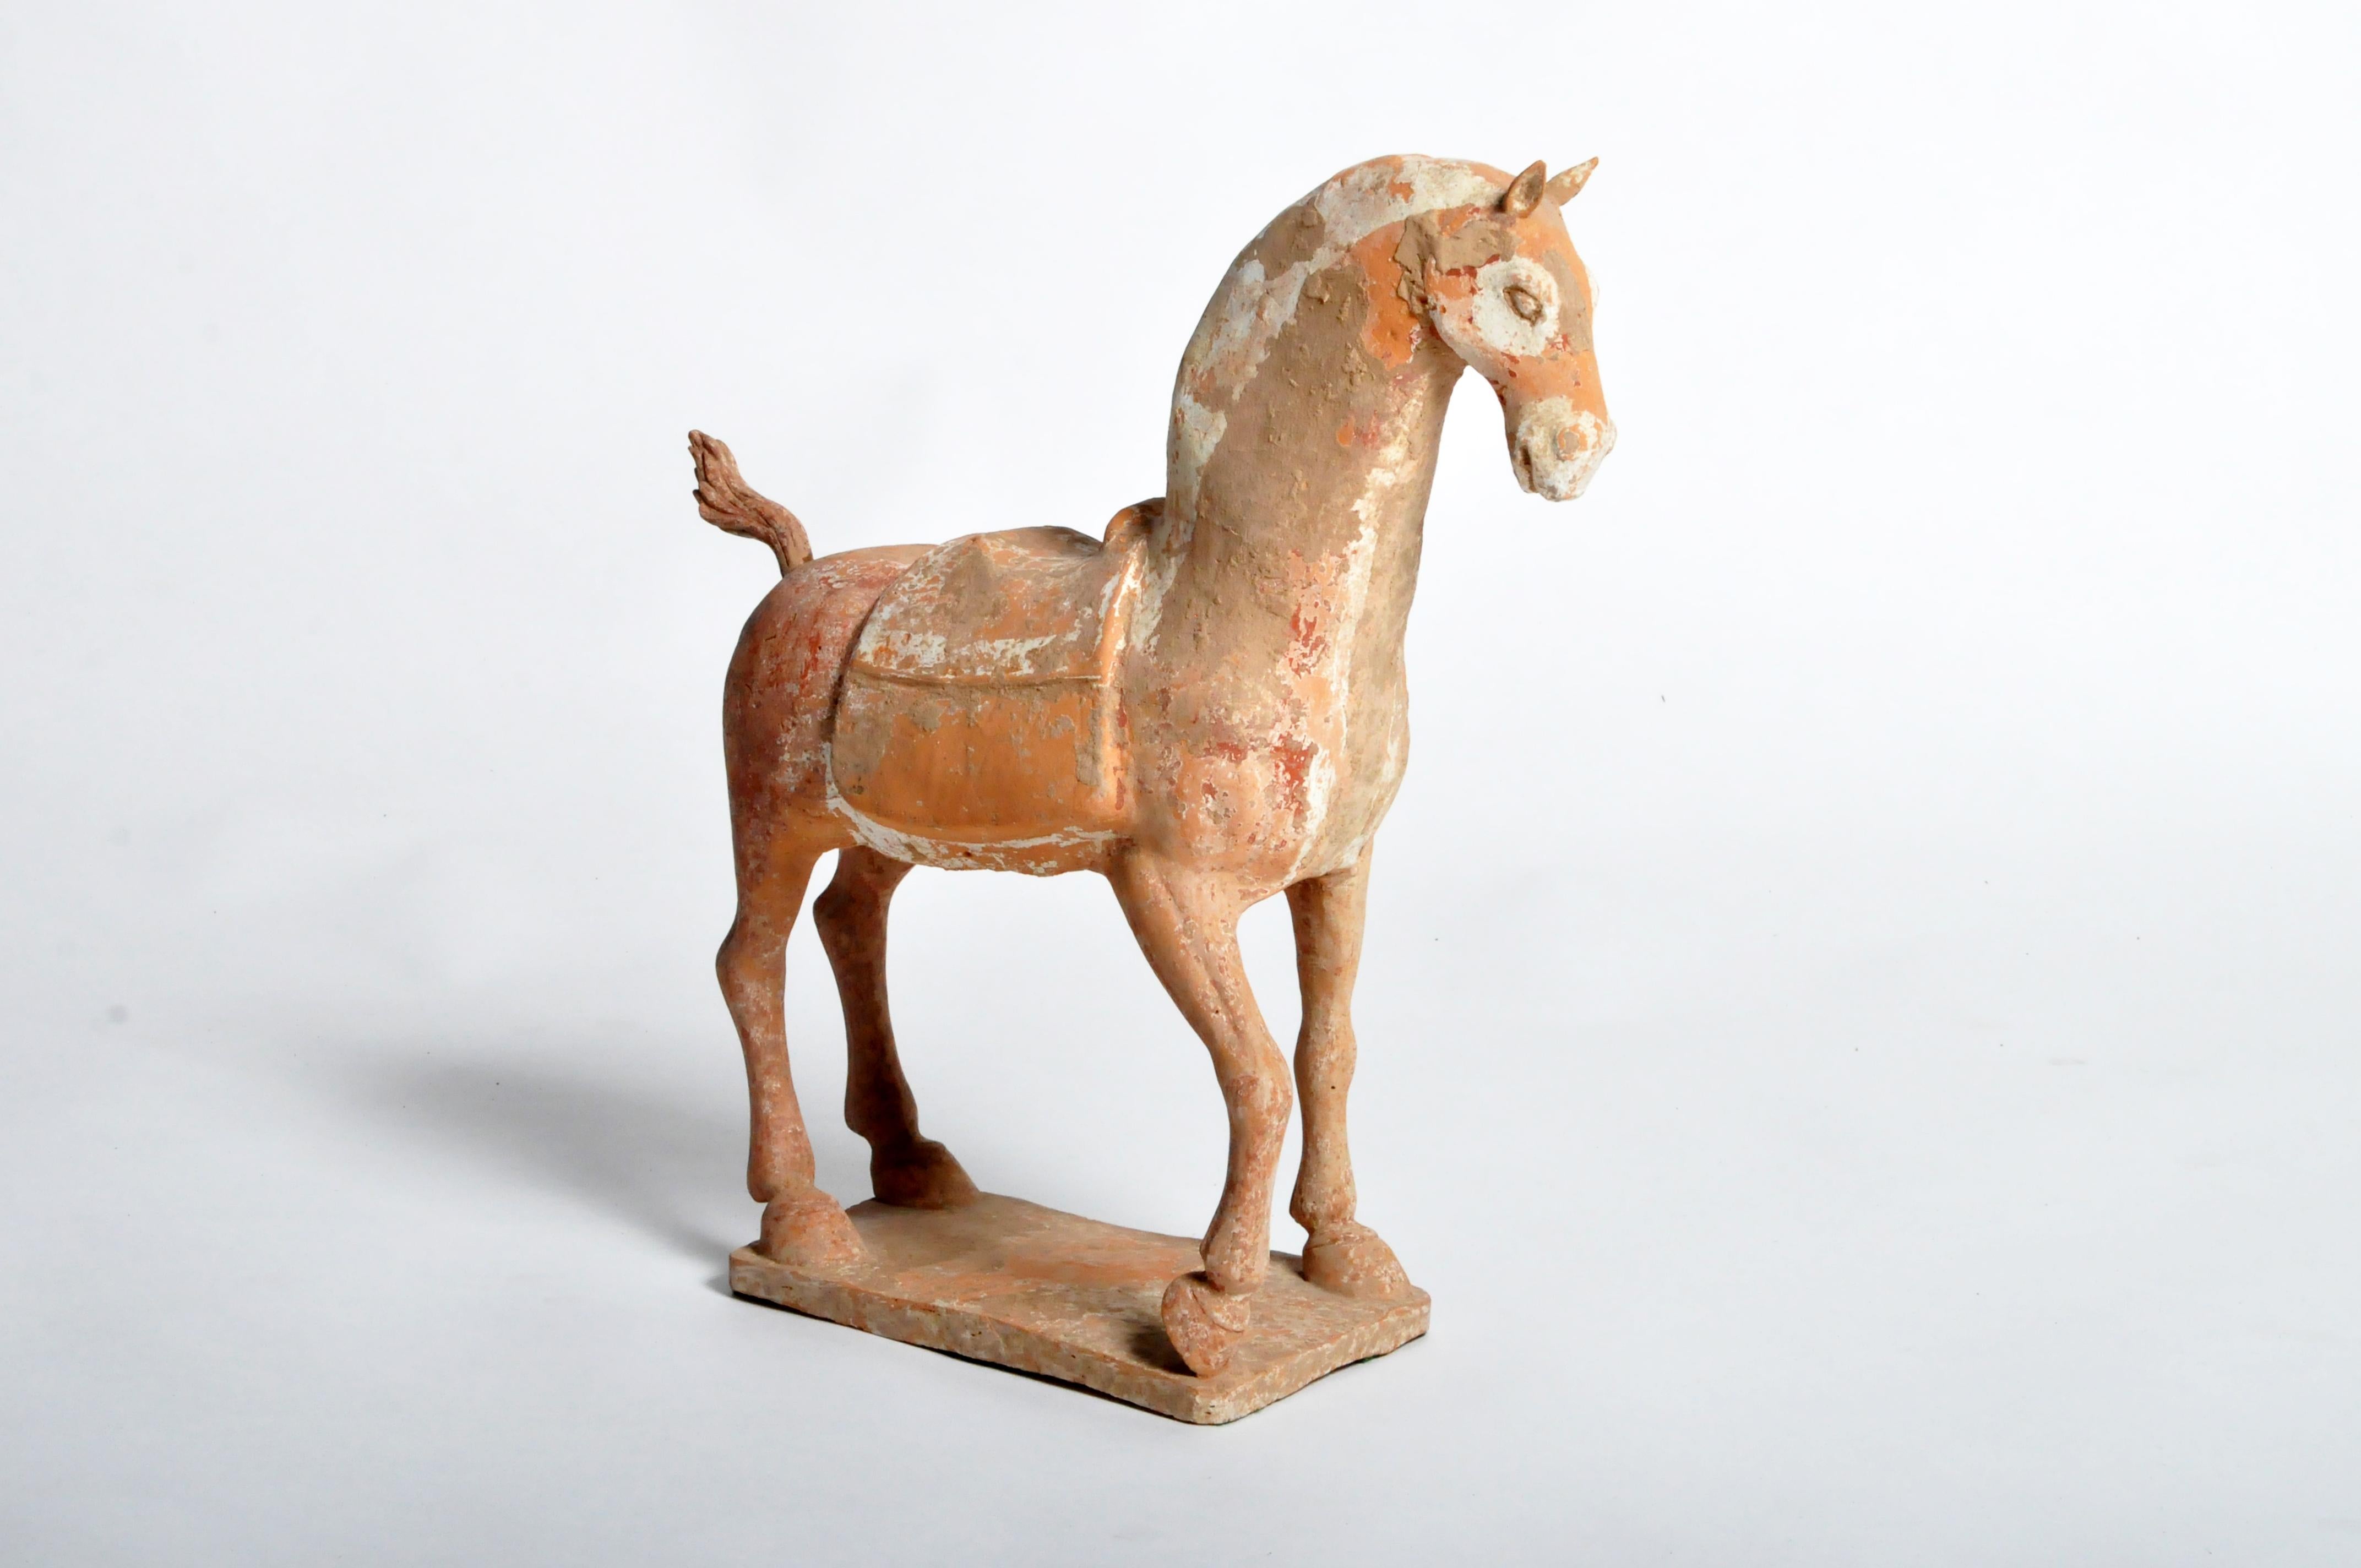 Six Dynasties Period Figure of a Horse 3